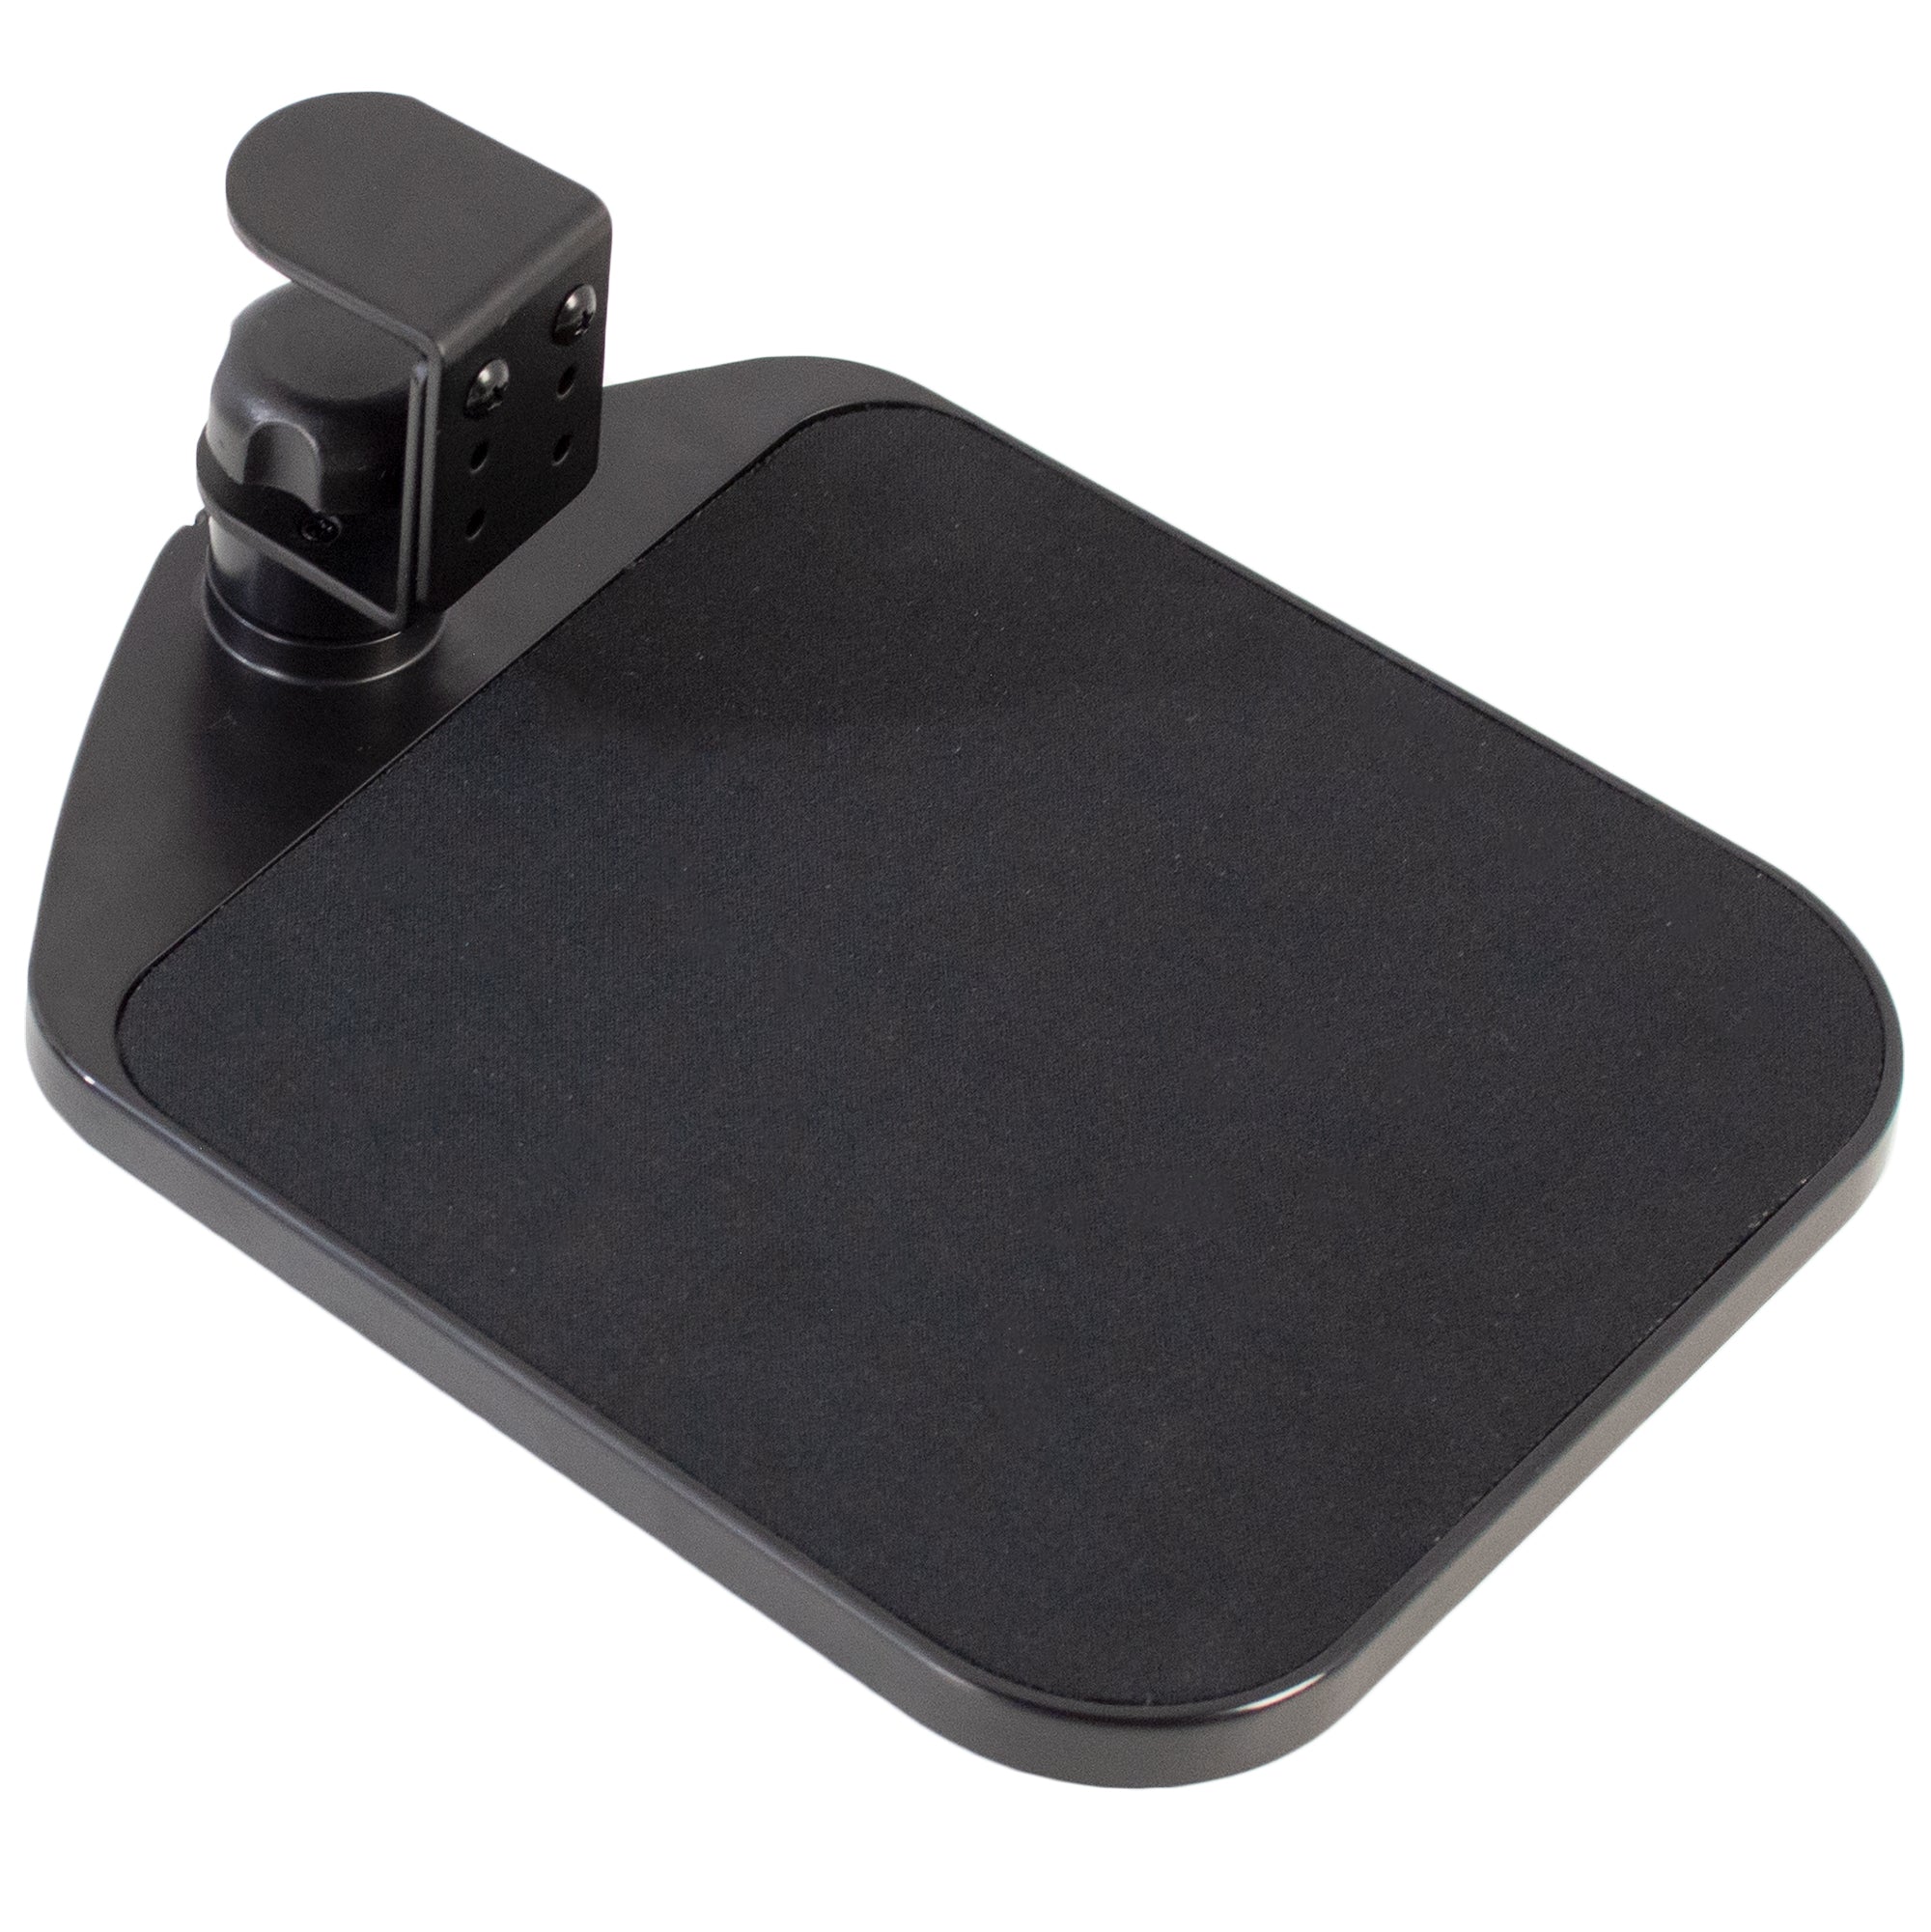 Mouse Pad with Wrist Support, Non-Slip - Monitor Mounts, Display Mounts  and Ergonomics